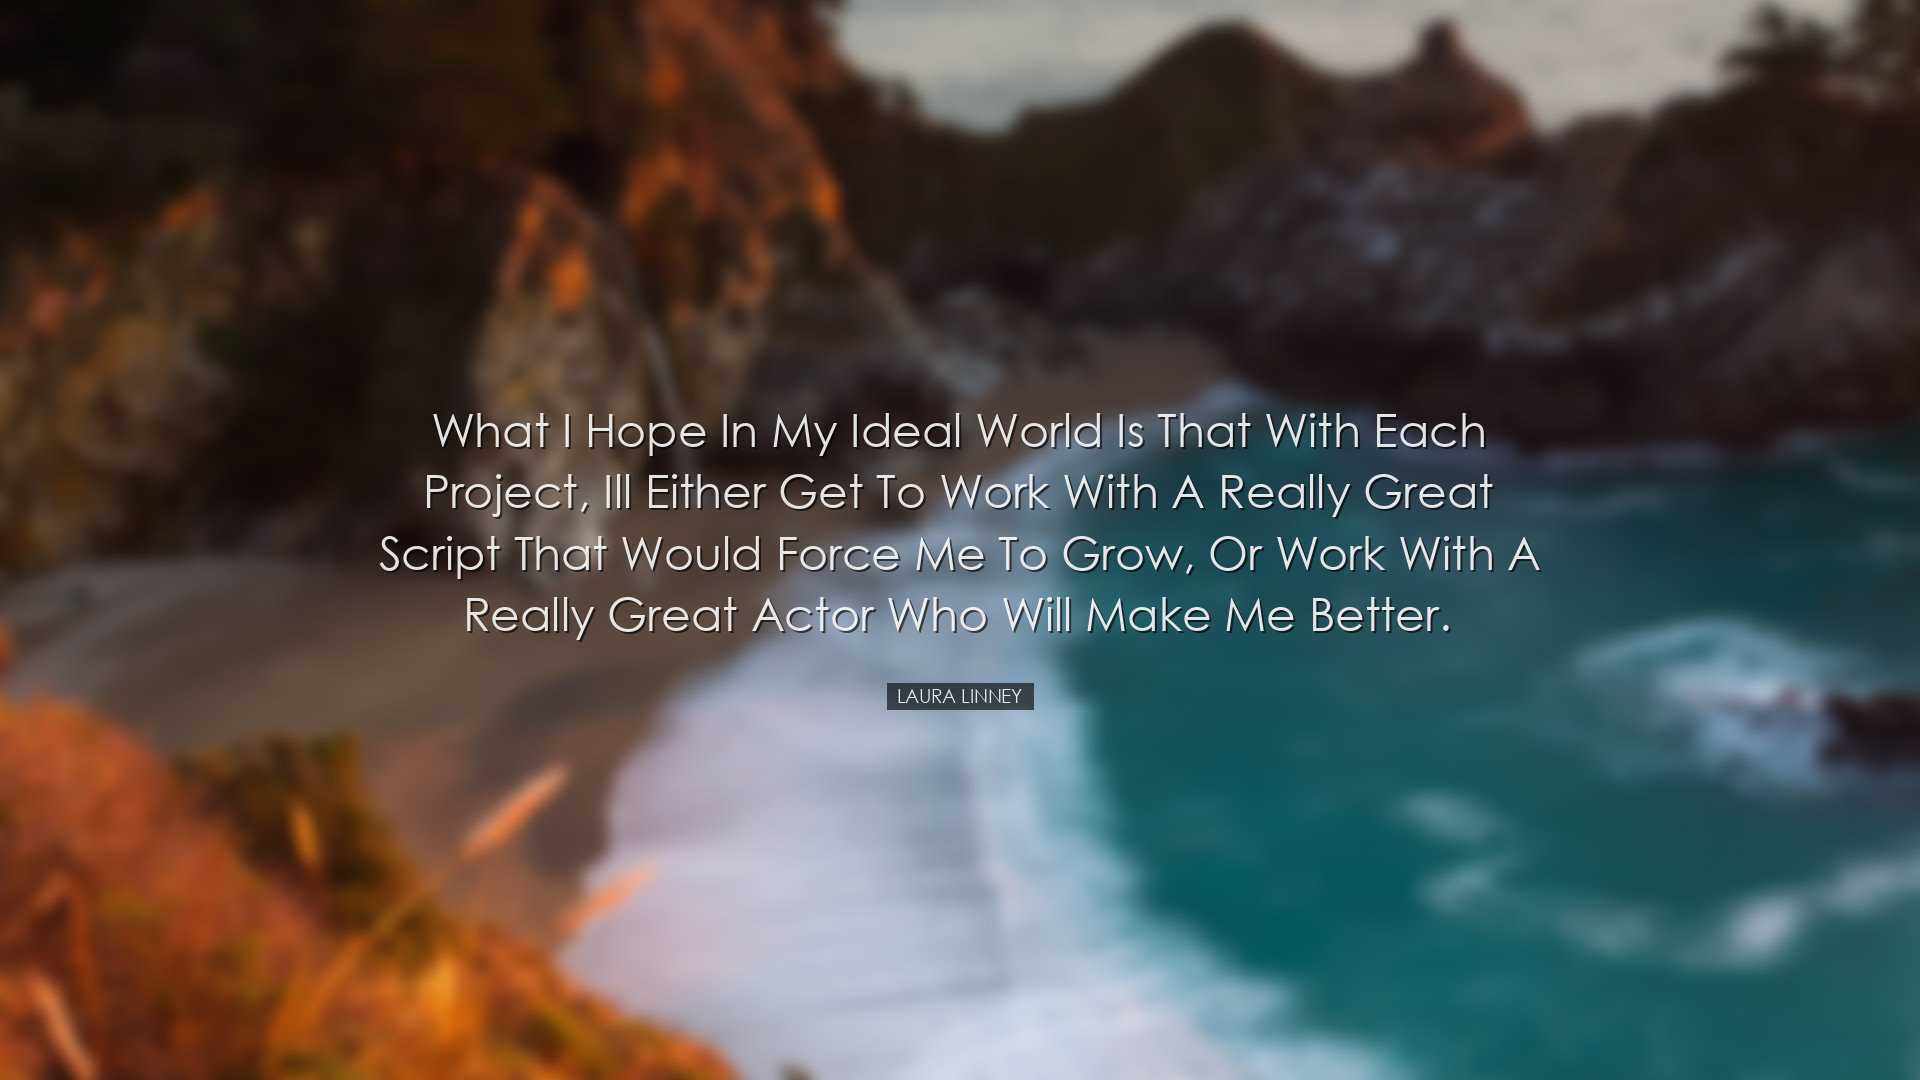 What I hope in my ideal world is that with each project, Ill eithe